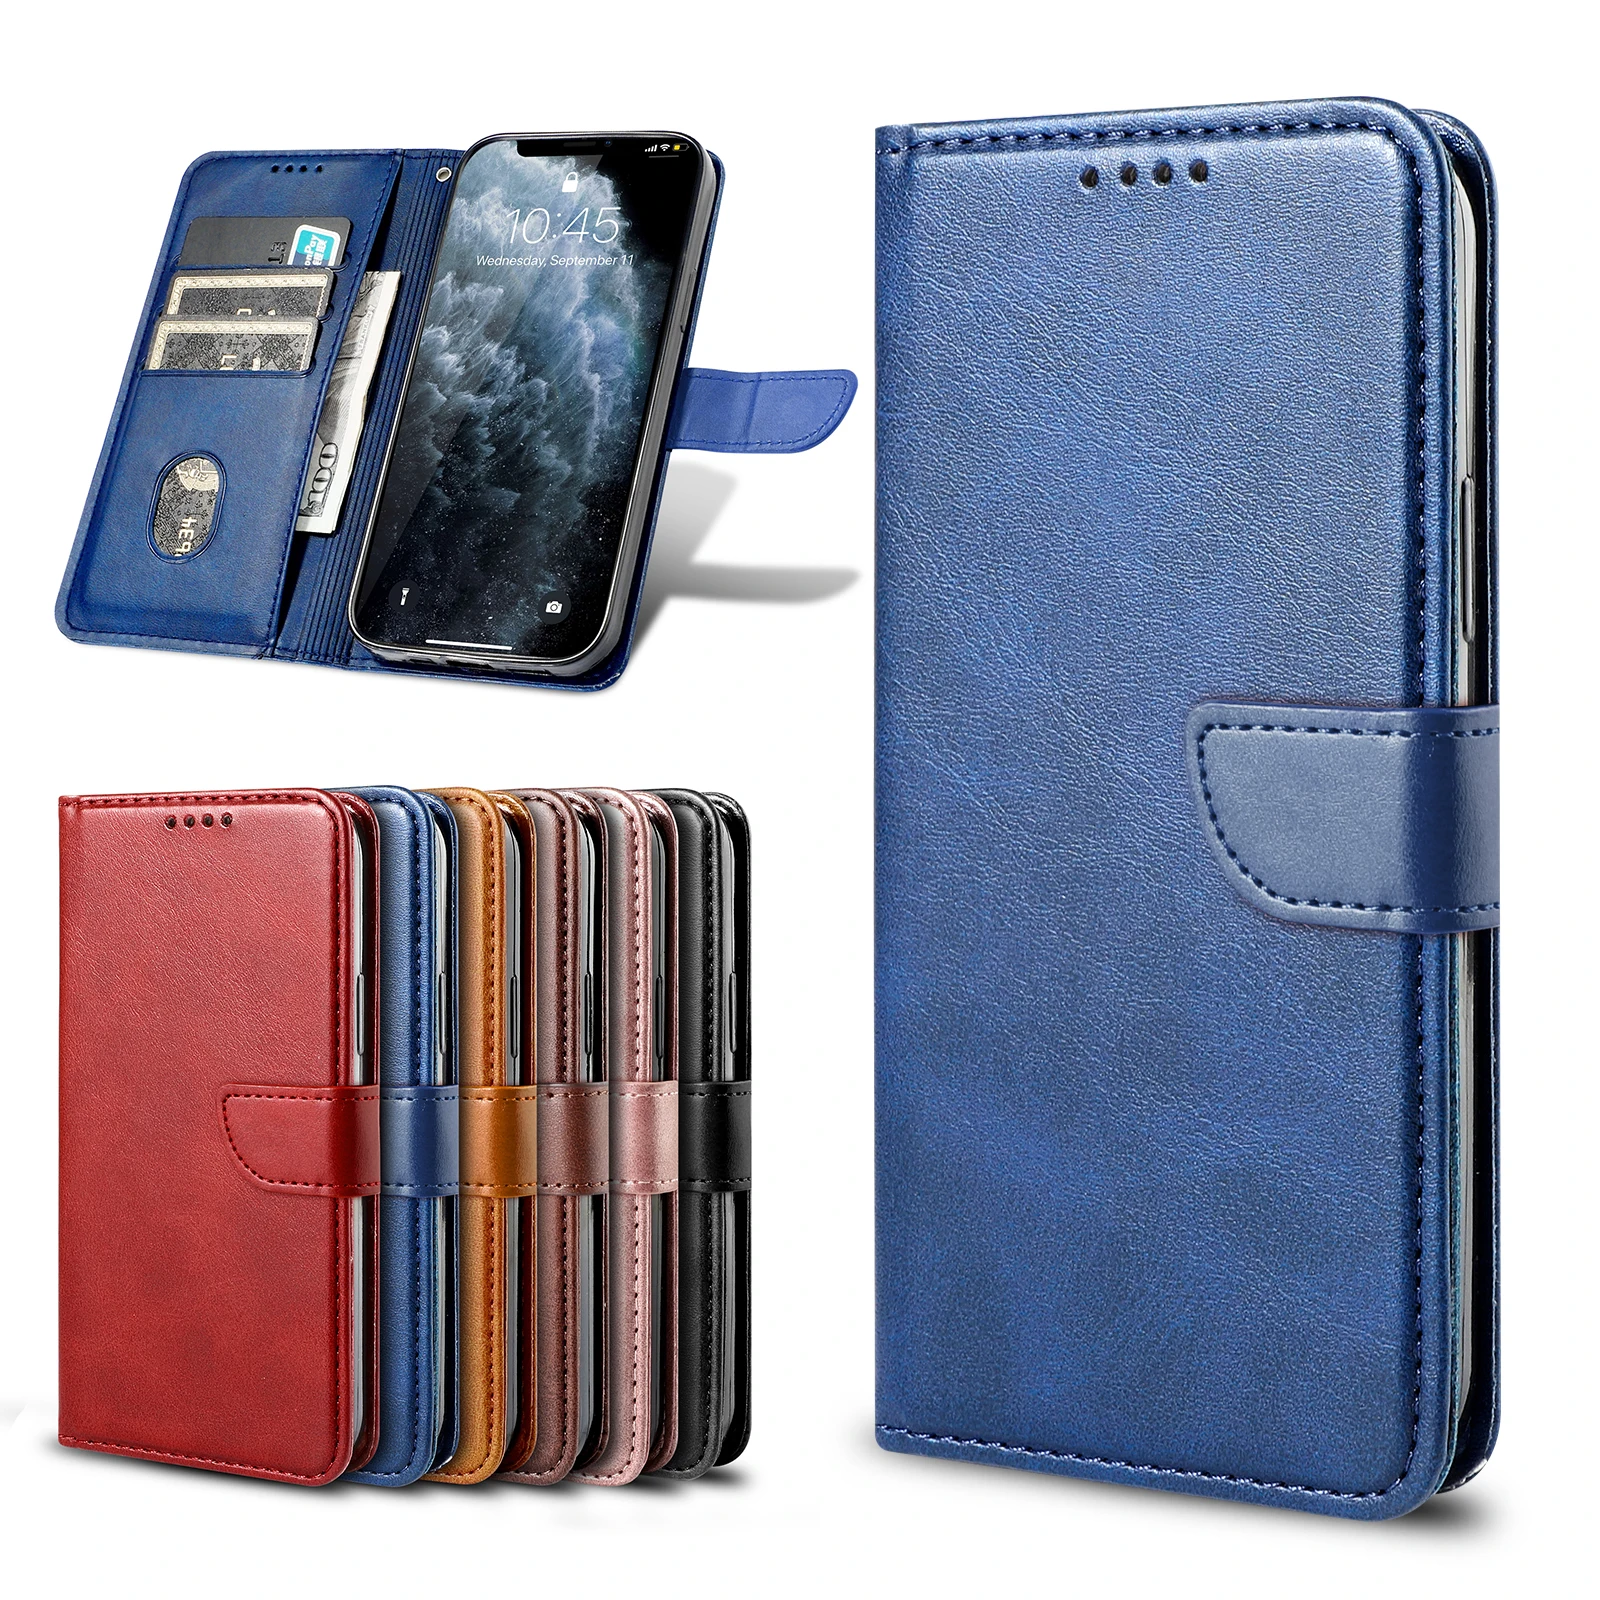 

Case For Meizu M2 M3 M3s M5 M5s M6 Note M6s Mini Flip Cover Case Magnetic Leather Flip Case Protective Holster Phone Shell